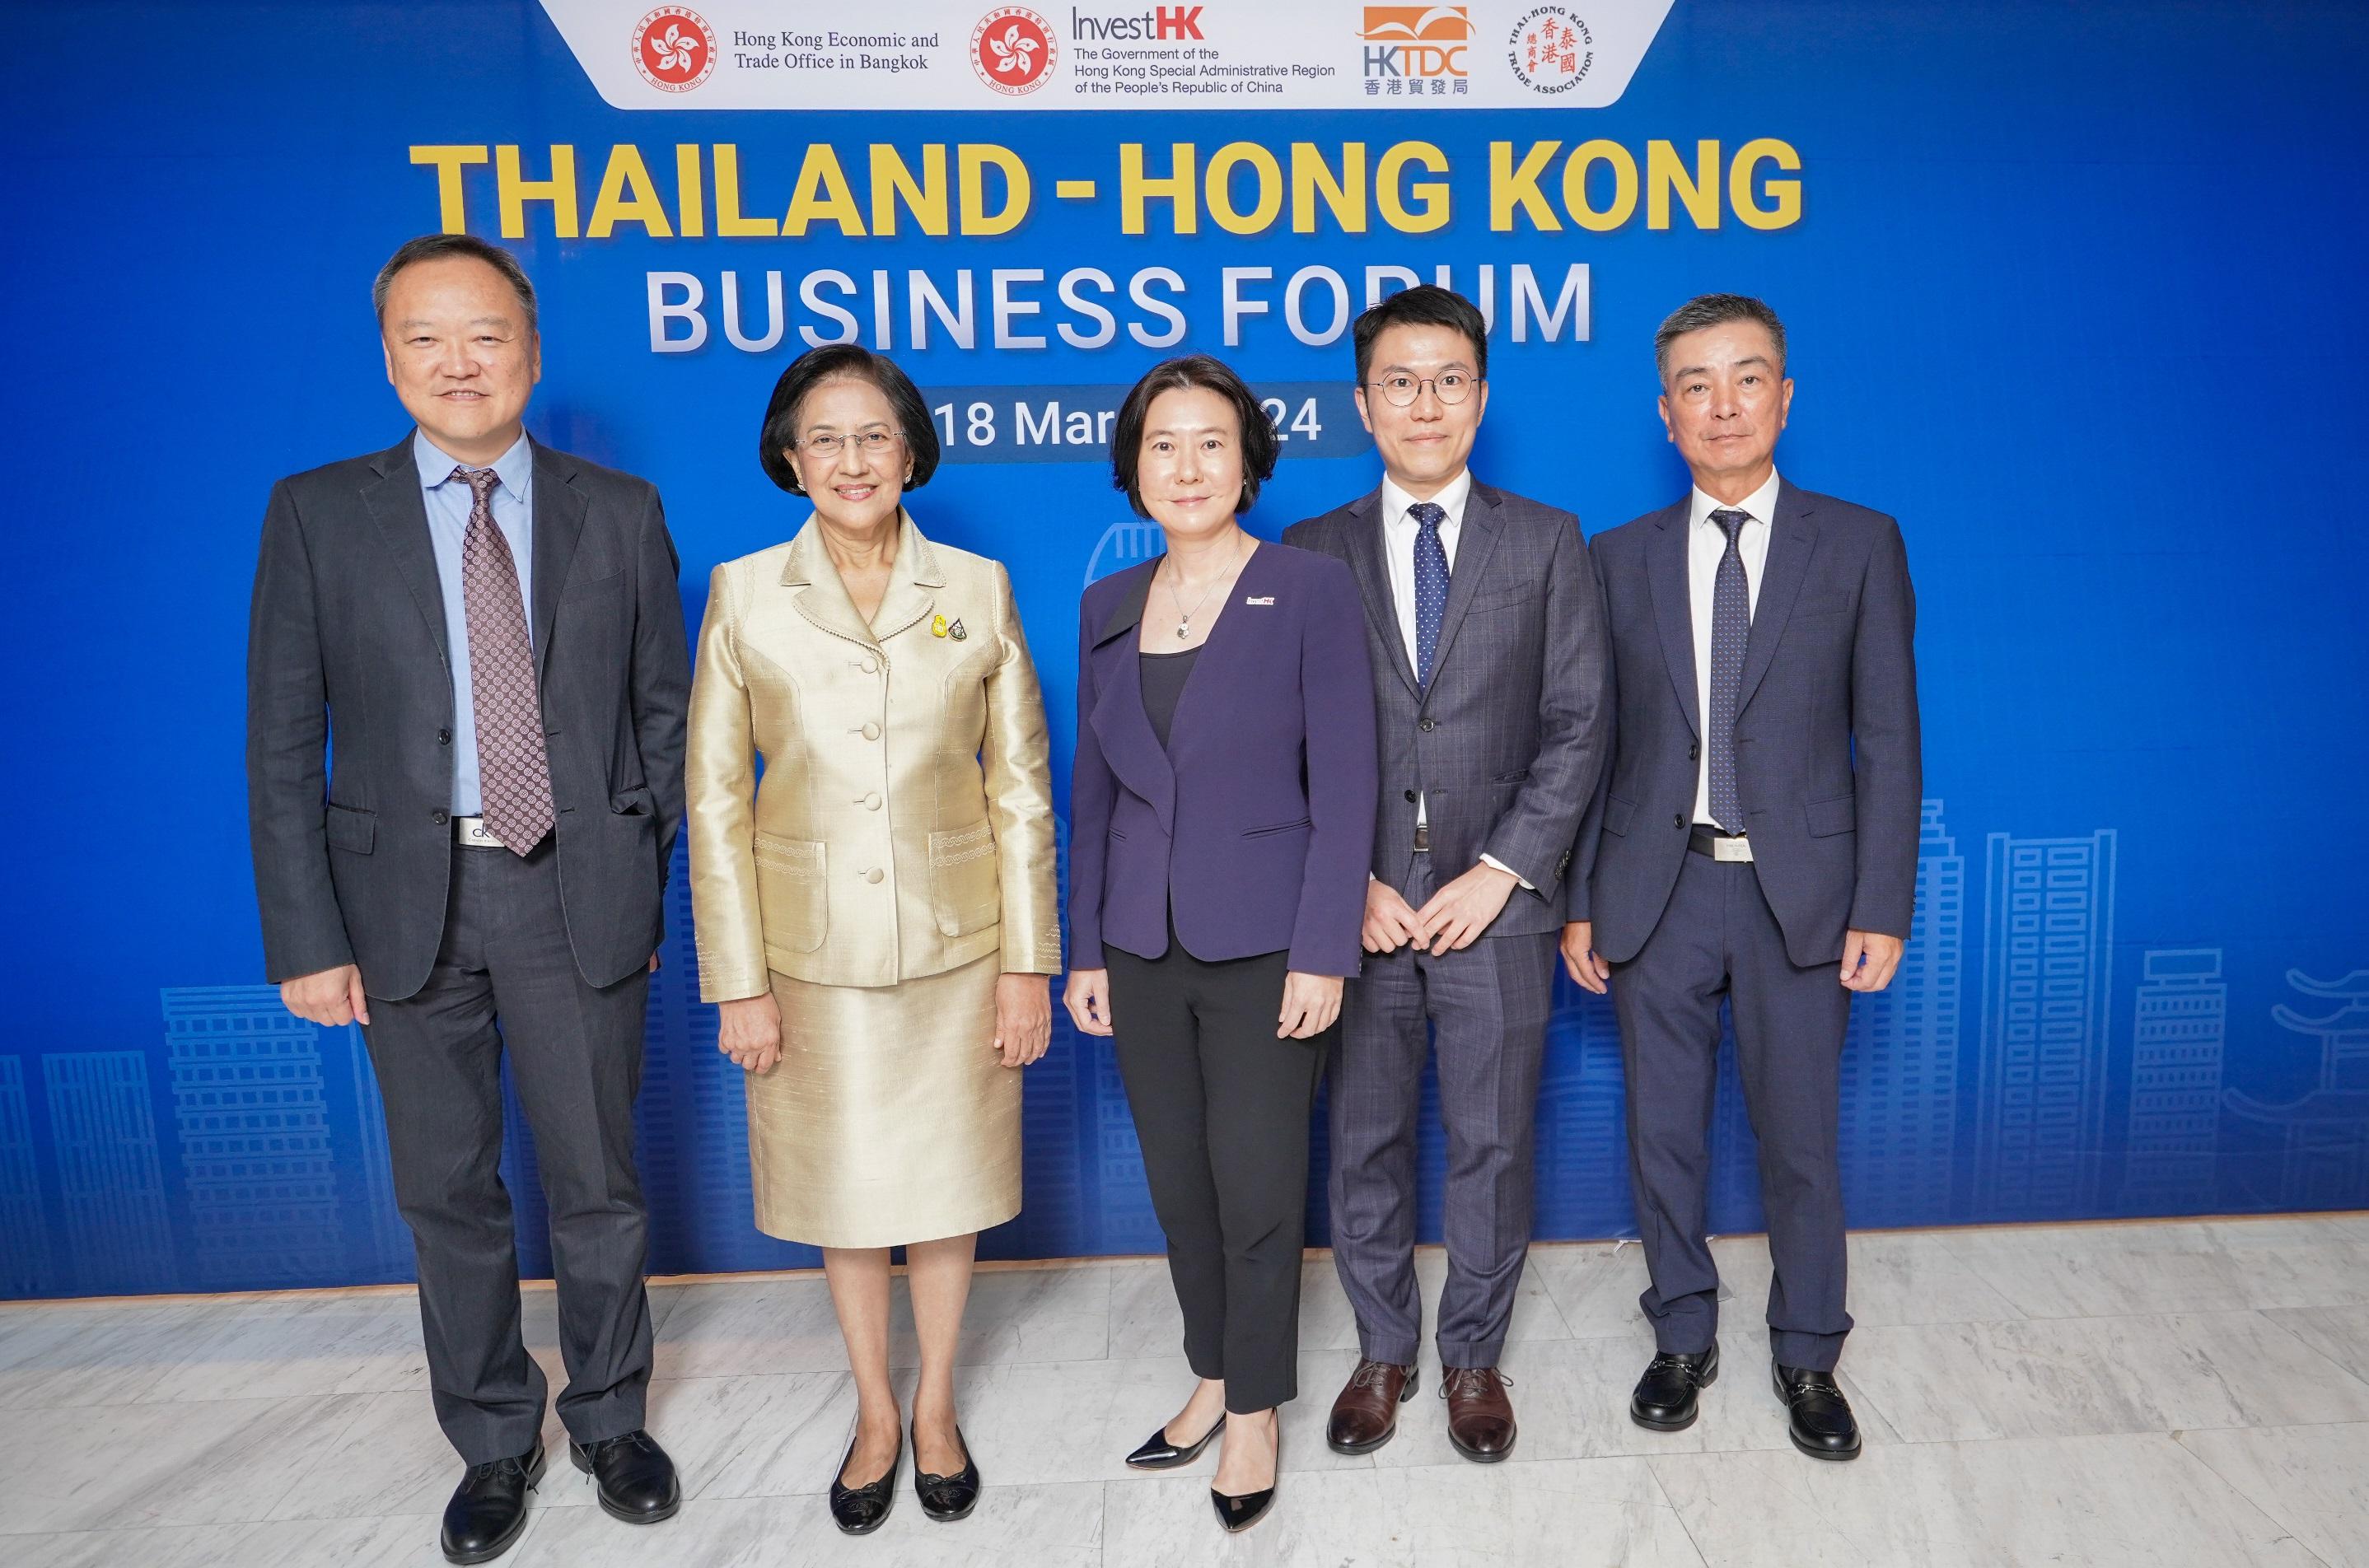 The Hong Kong Economic and Trade Office in Bangkok (Bangkok ETO) jointly organised the Thailand-Hong Kong Business Forum with Invest Hong Kong (InvestHK) and the Hong Kong Trade Development Council (HKTDC) in Bangkok today (March 18). Photo shows the Director of the Bangkok ETO, Mr Parson Lam (second right); the Advisor to the Prime Minister of Thailand and Thailand Trade Representative, Dr Nalinee Taveesin (second left); the Director-General of Investment Promotion of InvestHK, Ms Alpha Lau (centre); the Regional Director, Southeast Asia and South Asia of HKTDC, Mr Ronald Ho (first left); and the President of the Thai-Hong Kong Trade Association, Mr Danny Yu, in the Forum.  